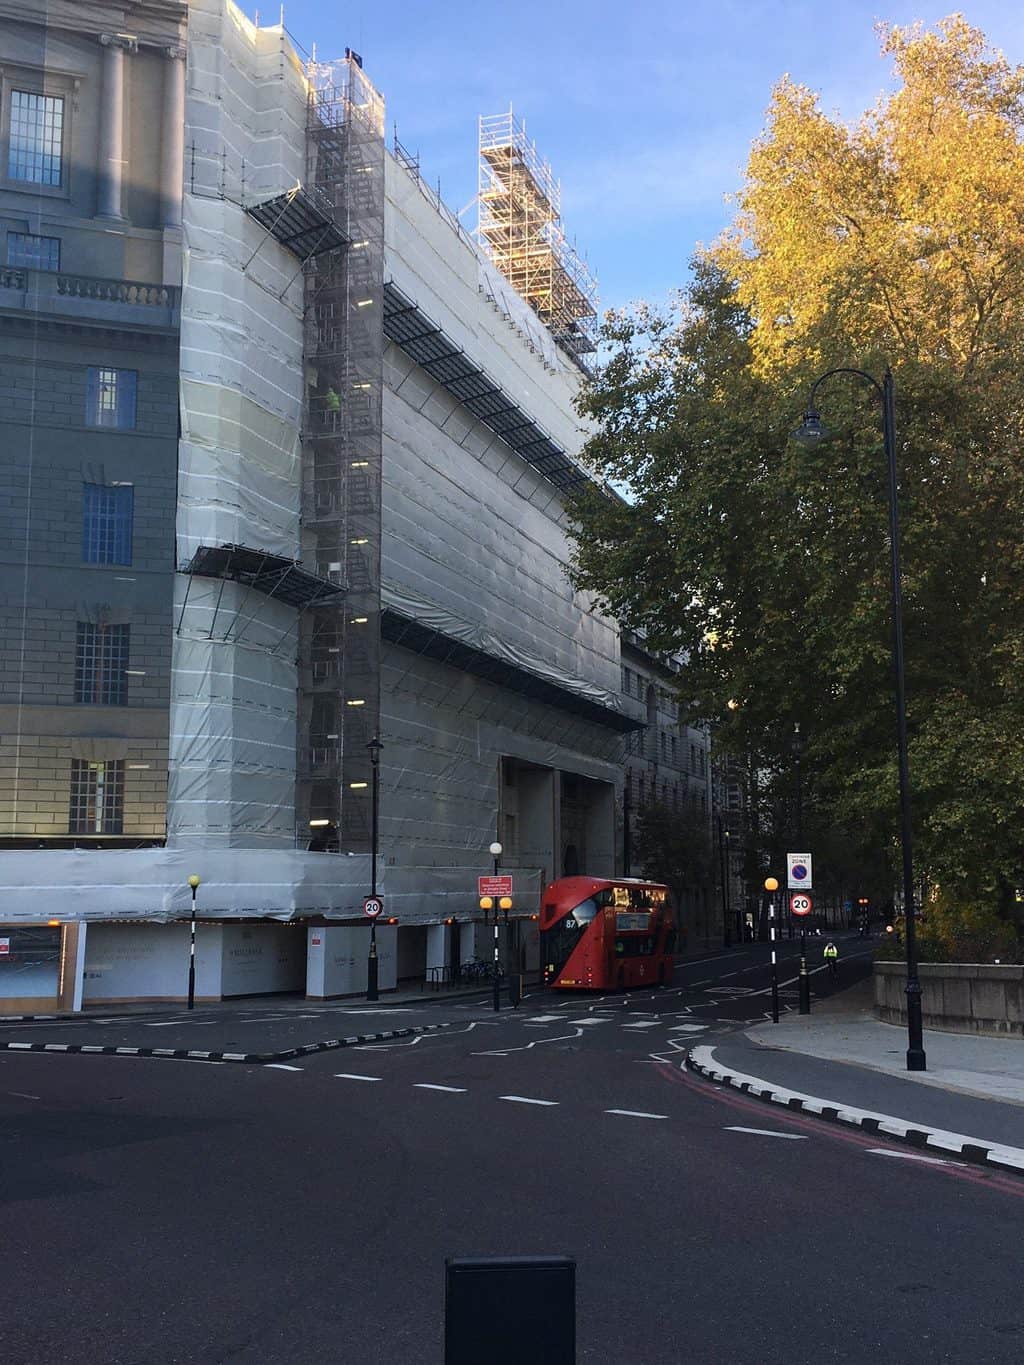 TRAD Scaffolding Contractors (TRAD) has completed the erection stage of work on 9 Millbank, a busy central London development managed by St Edwards Homes.